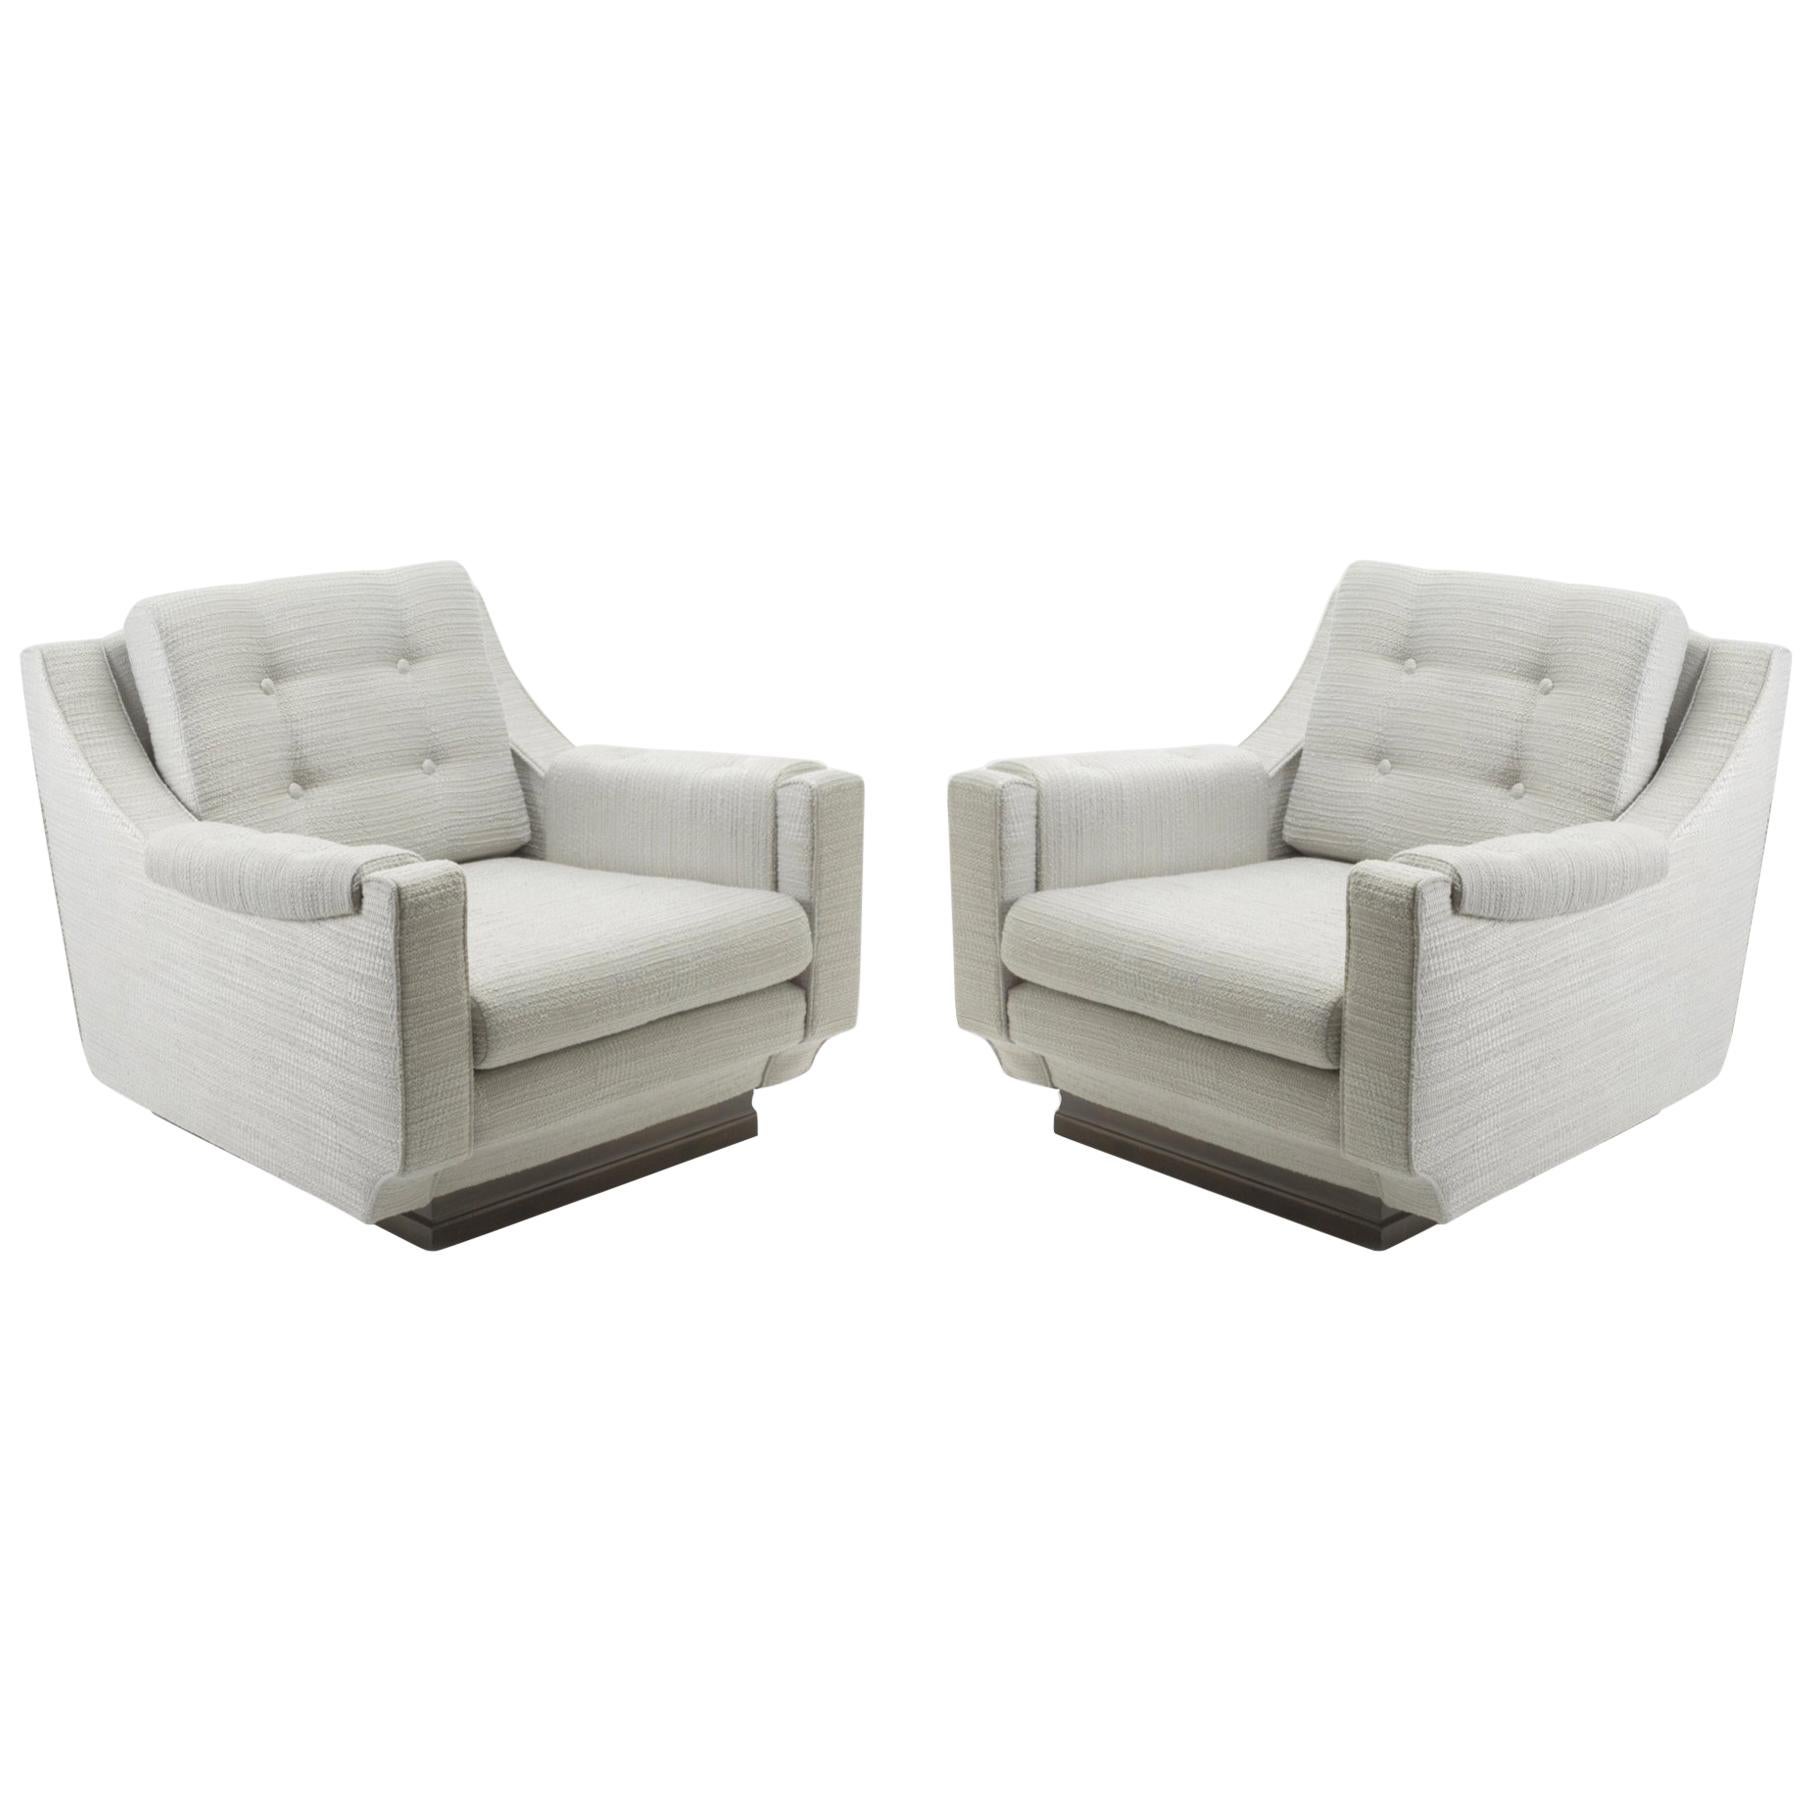 Pair of Cinova Midcentury Italian Chairs Reupholstered in Woven Fabric